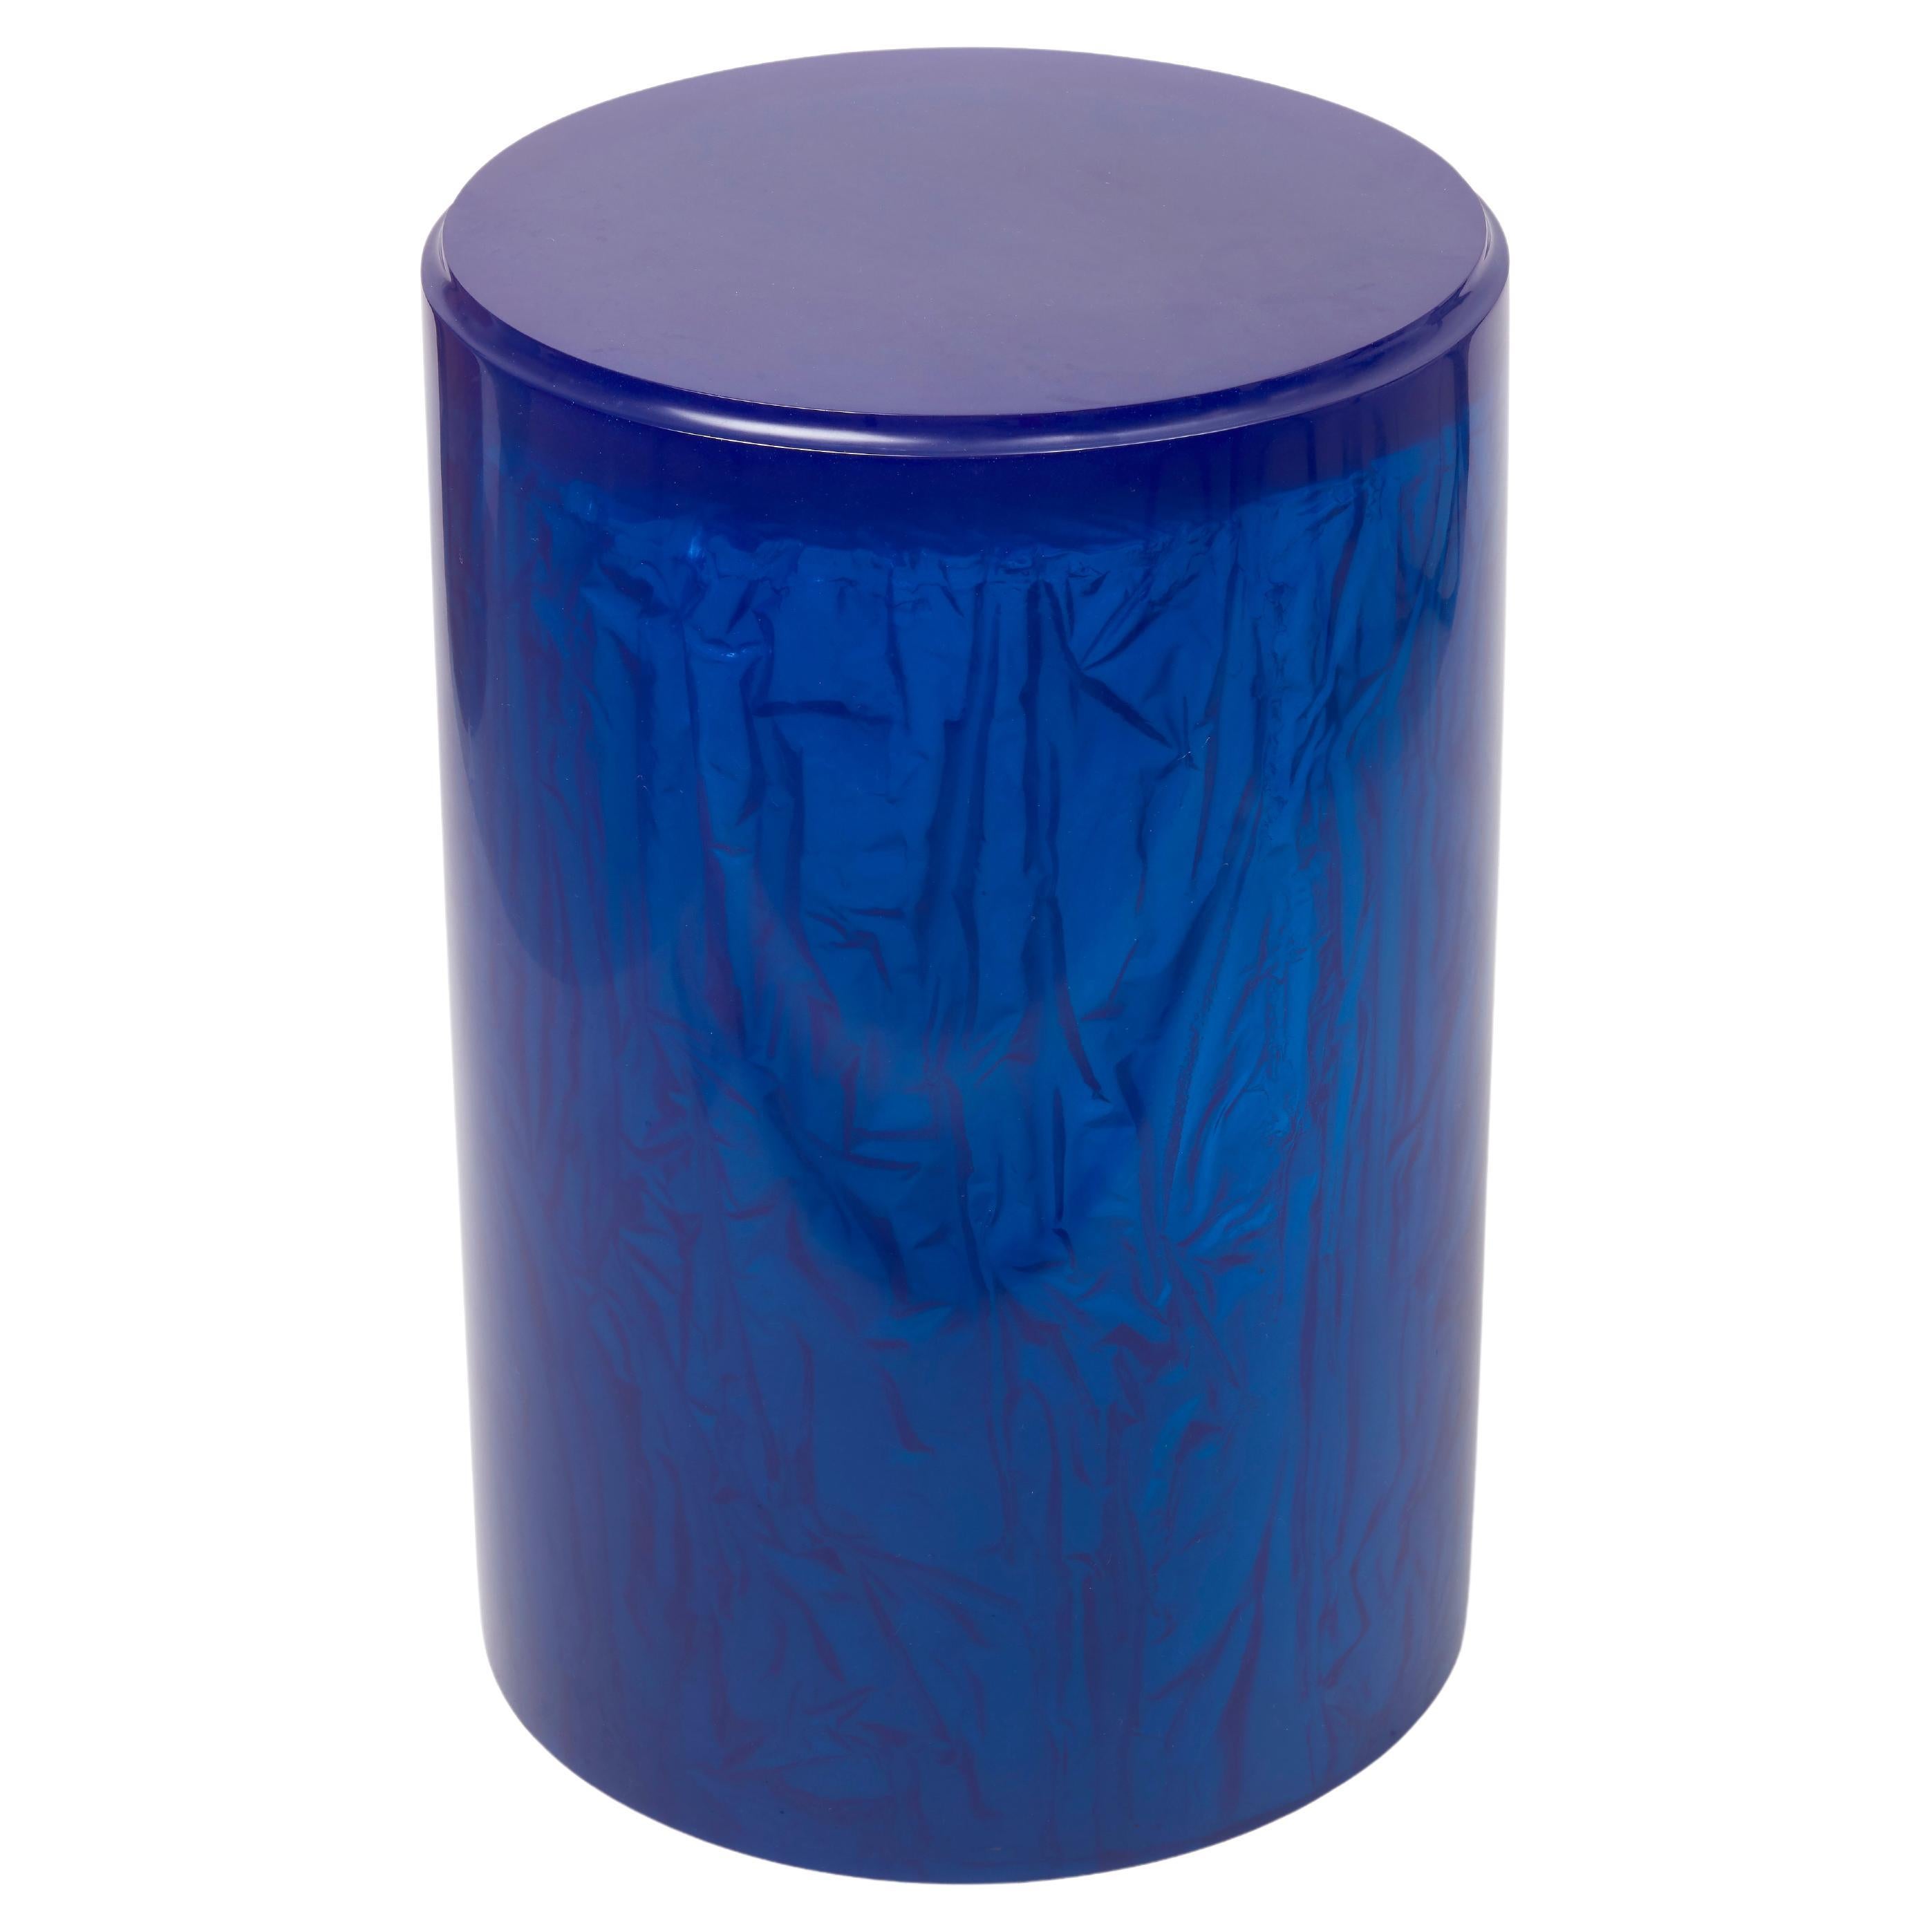 Contemporary Resin Acrylic Side Table or Stool by Natalie Tredgett, Cobalt Blue